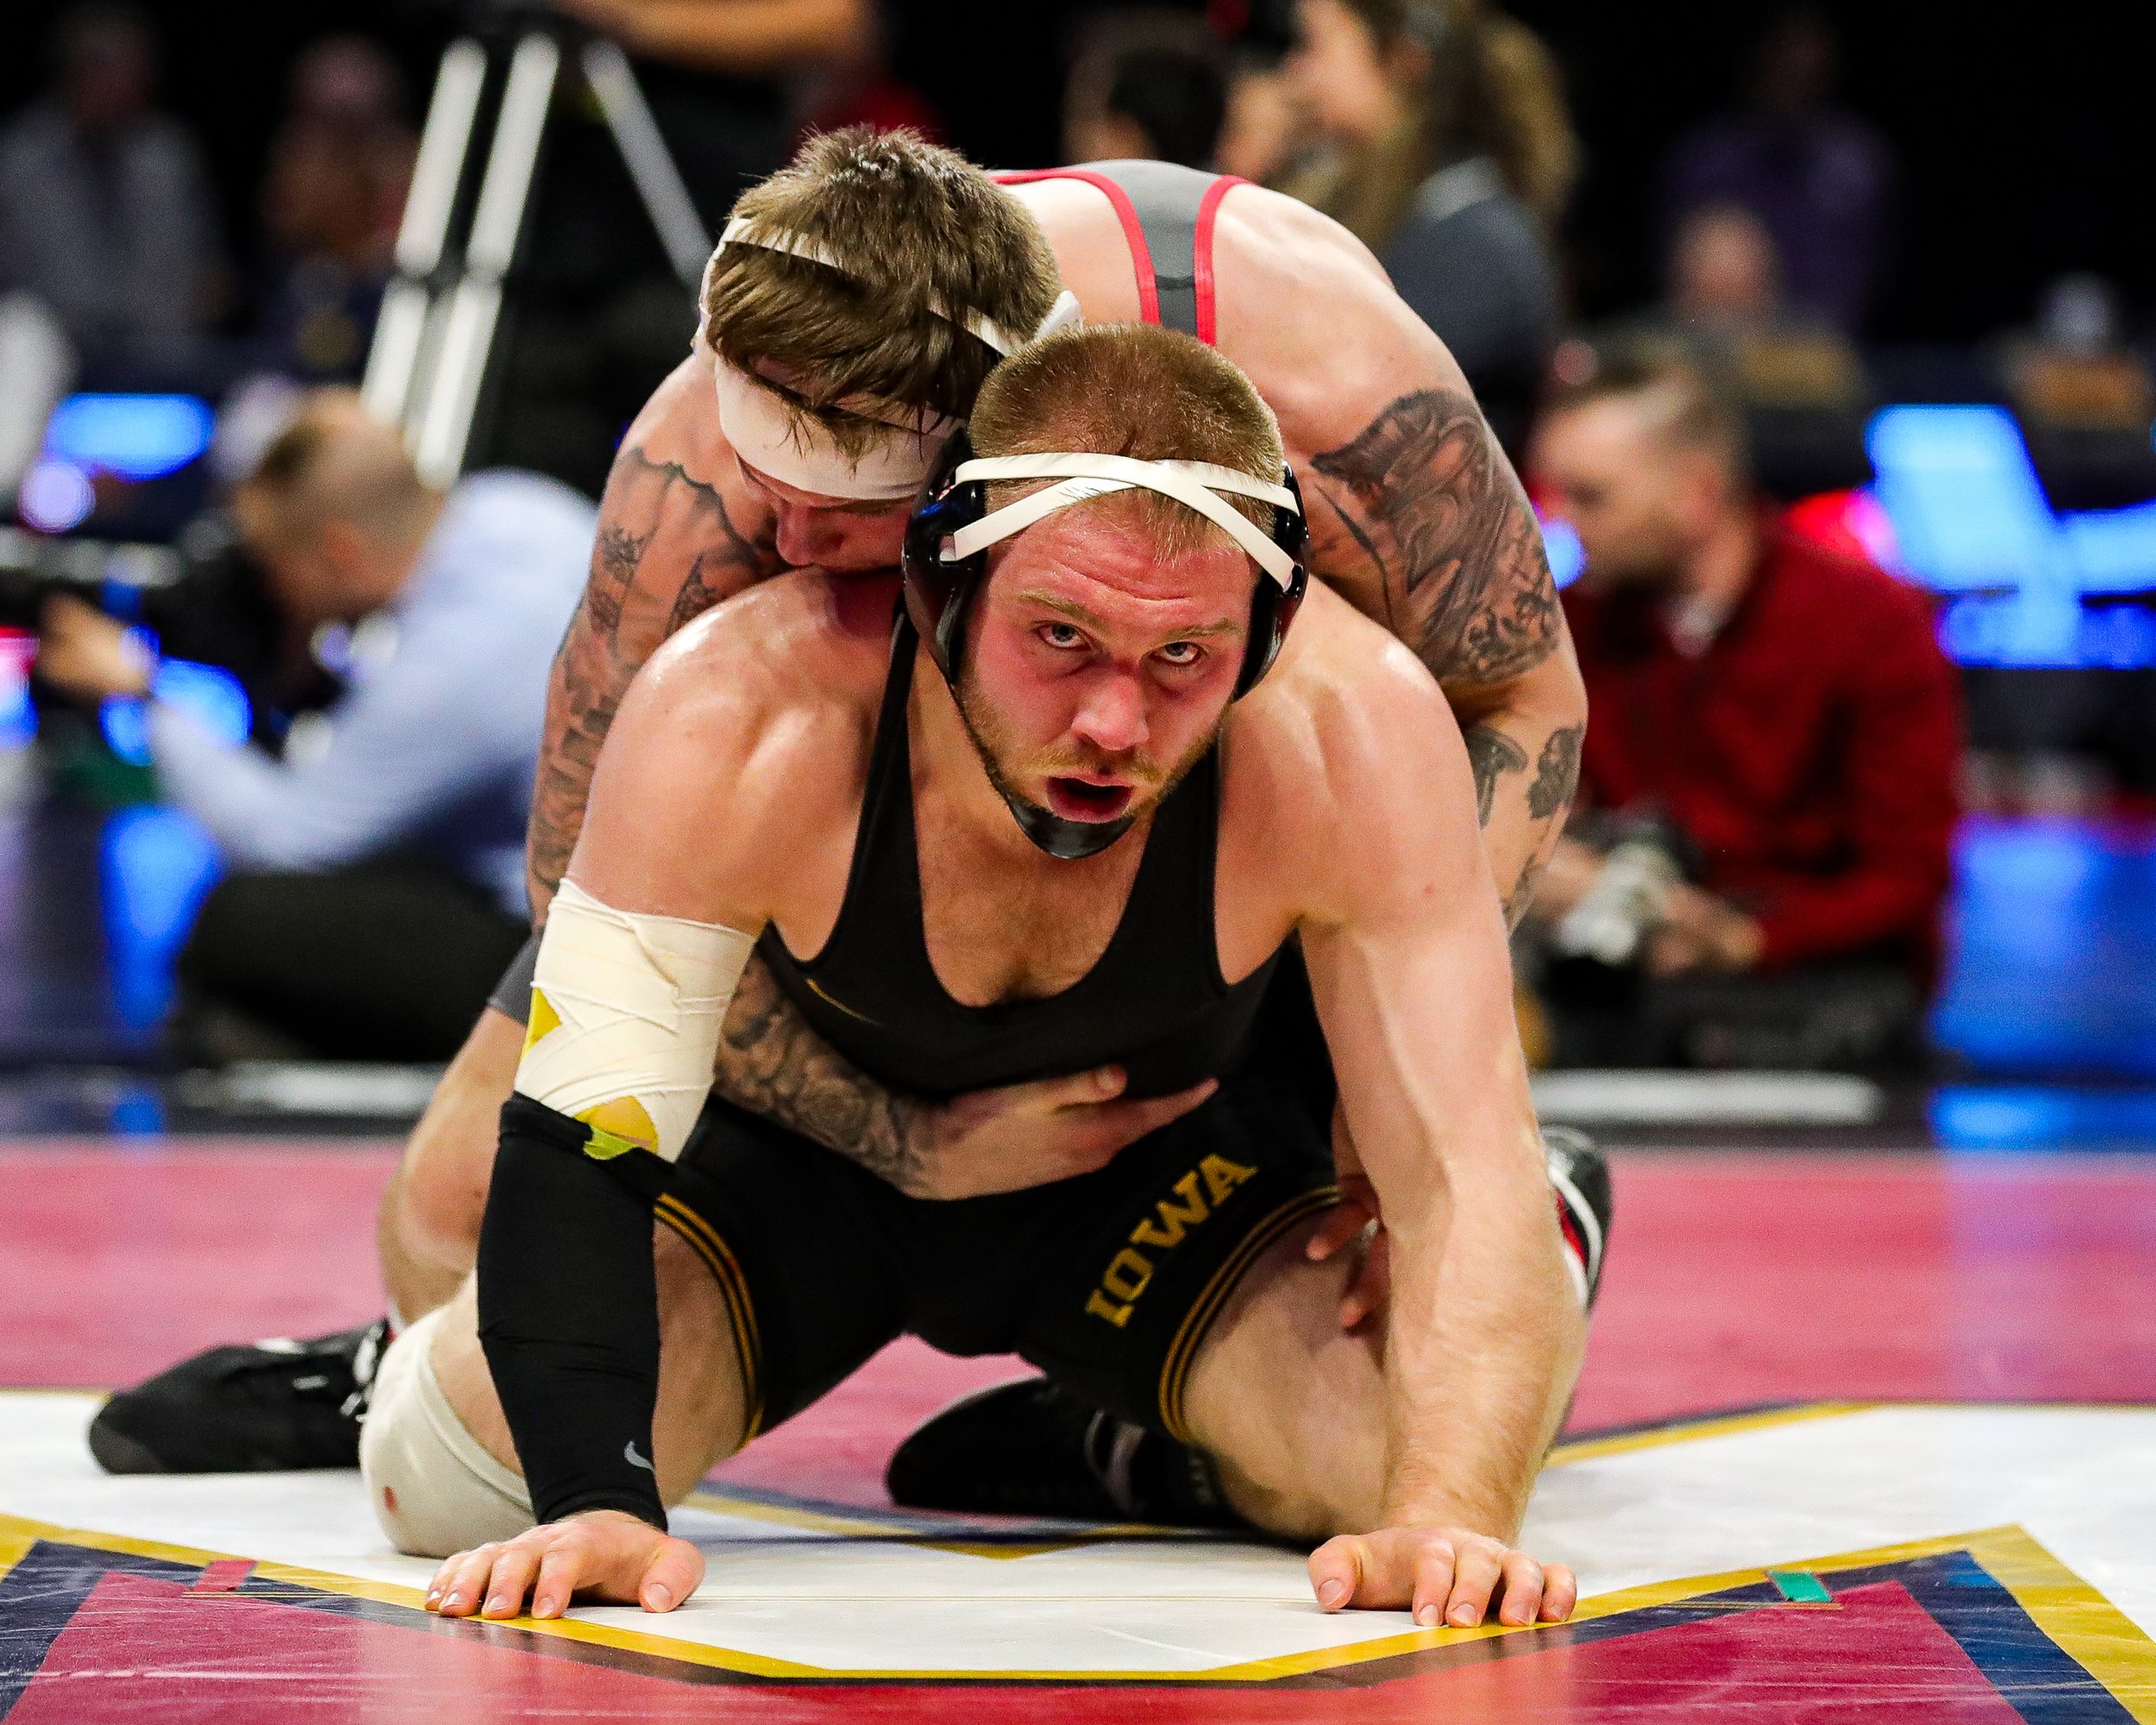  Iowa wrestler Patrick Kennedy grapples with Ohio State’s Rocco Welsh in a 174-lb semifinal consolation match during the Big Ten Wrestling Championships at the Xfinity Center in College Park, Maryland on Sunday, March 10, 2023. Kennedy lost 4-1. (Dav